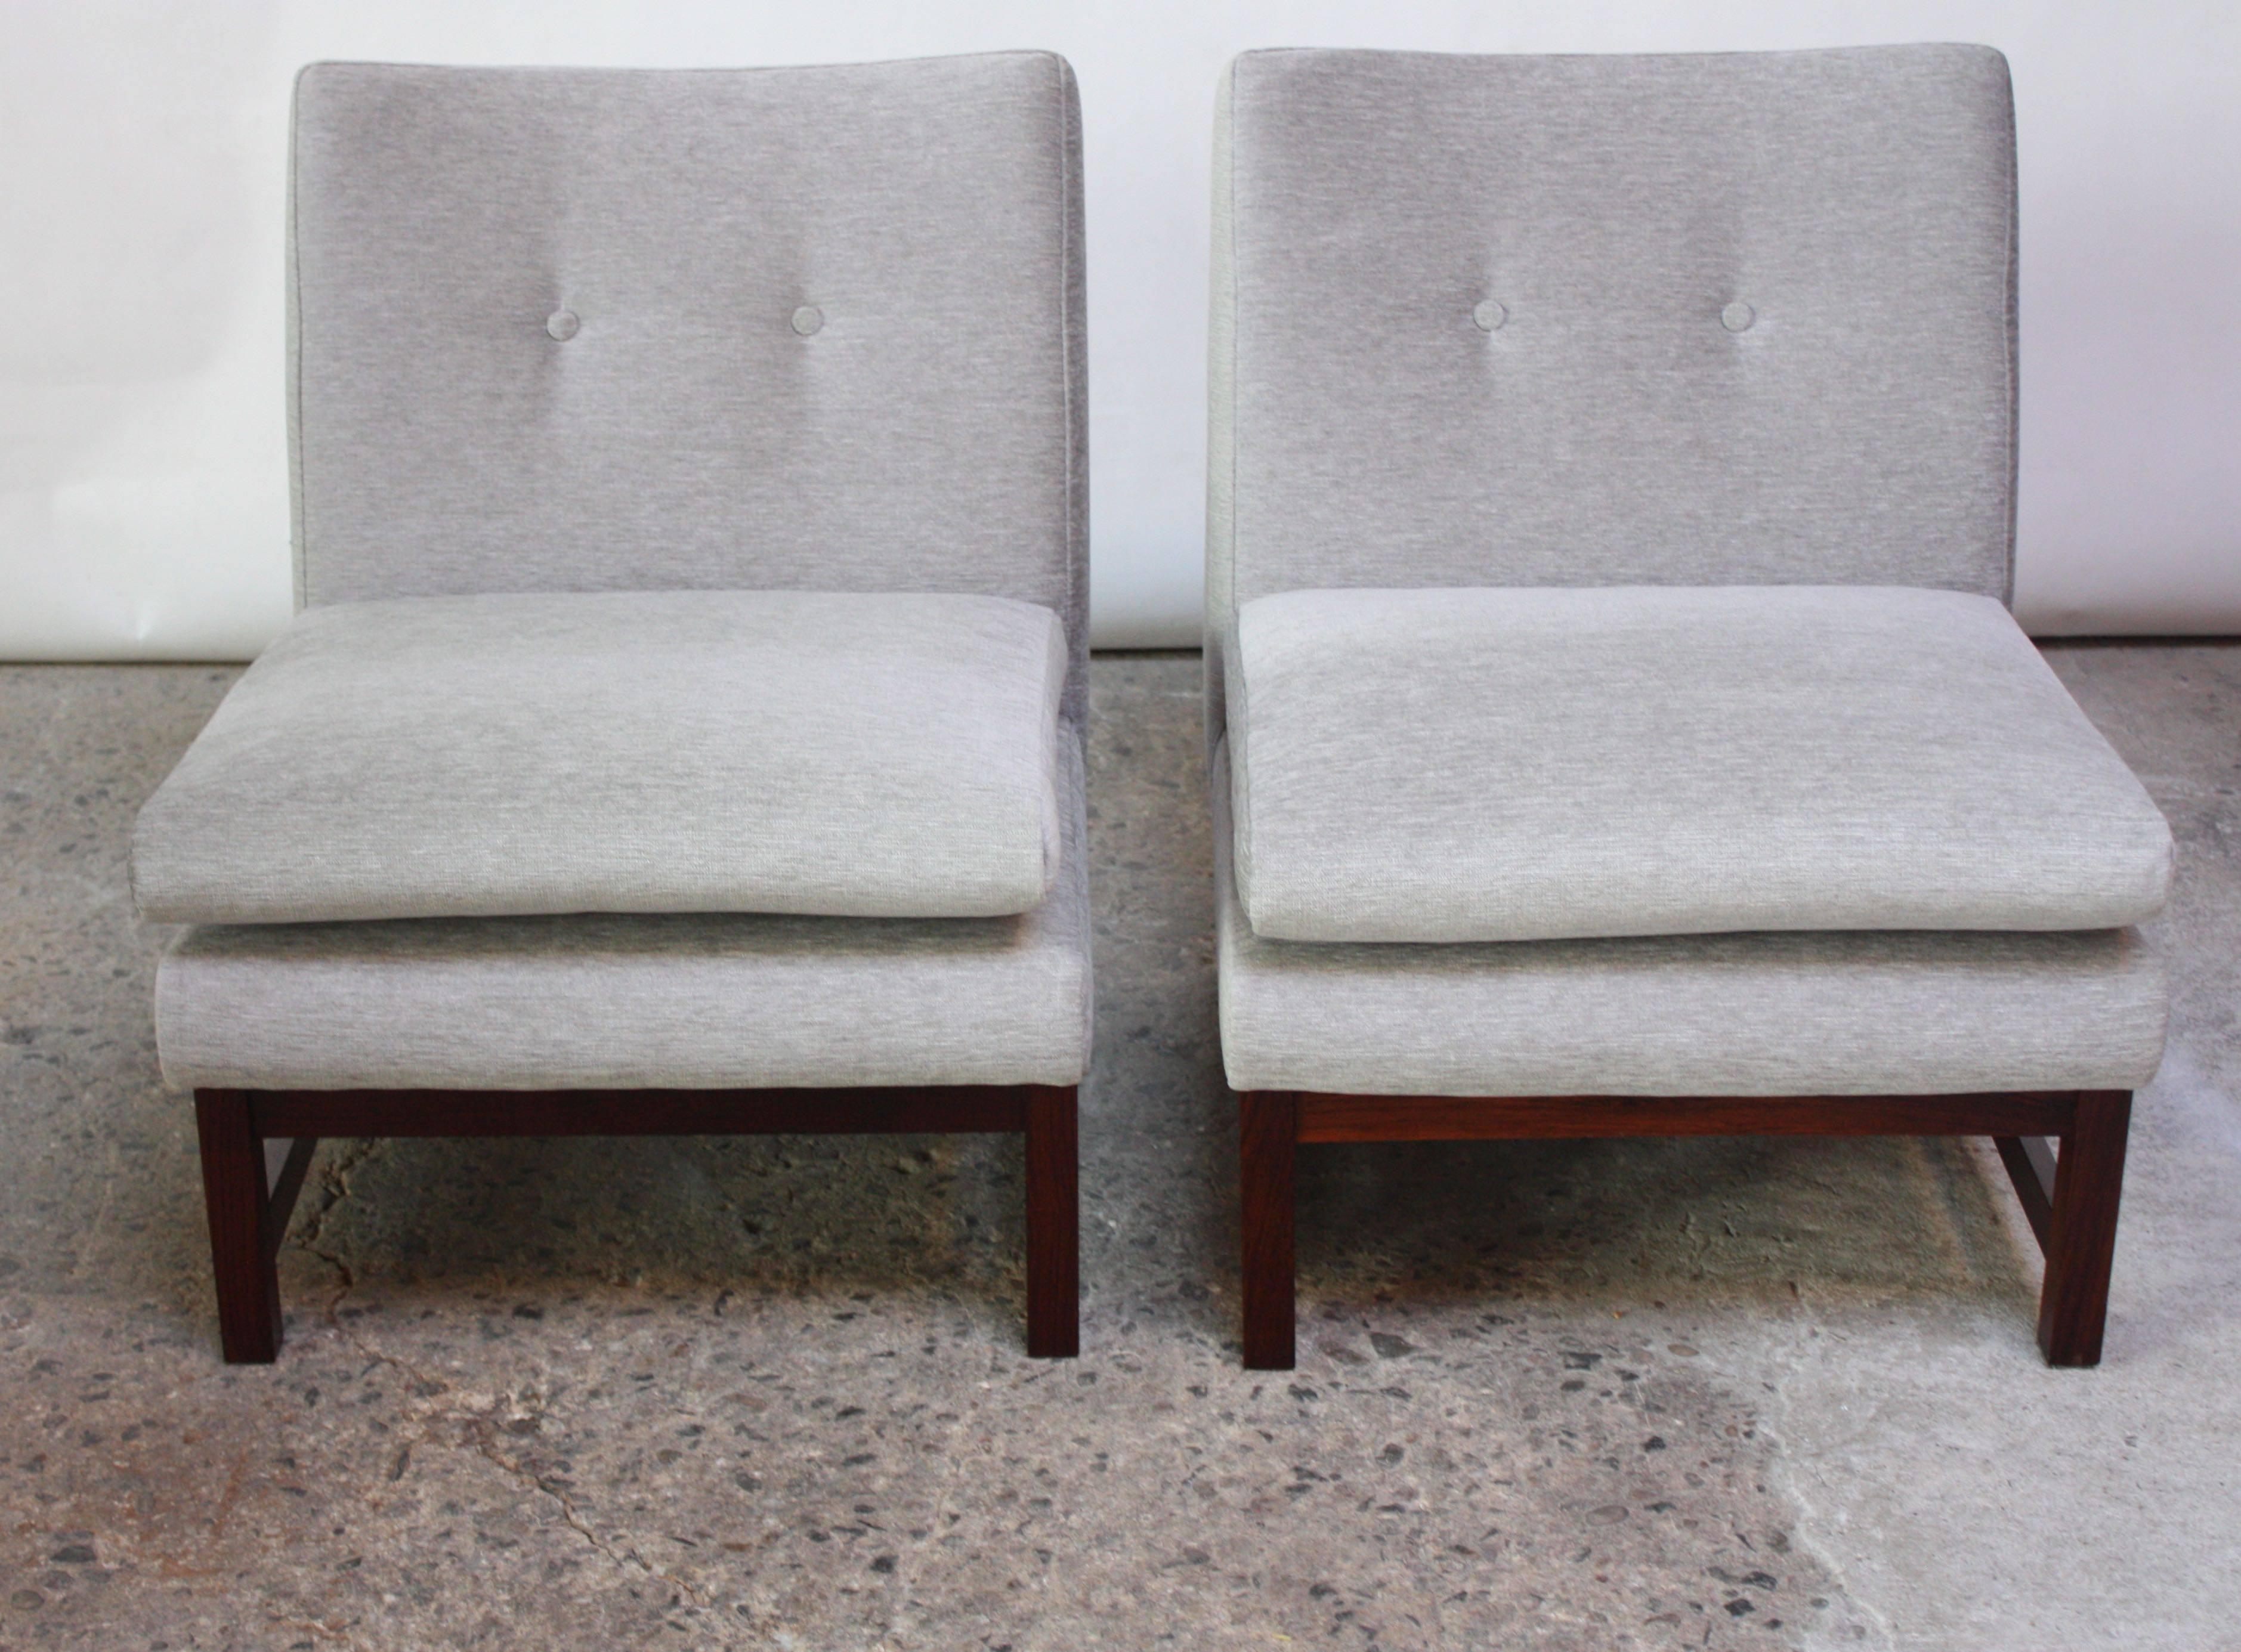 These Norwegian slipper chairs are composed of rosewood bases and sculptural frames. The top cushion is adjoined to the frame via two metal 'buckles' which hook to metal loop attachments on the cushion. (Top cushion can be removed for less padding,